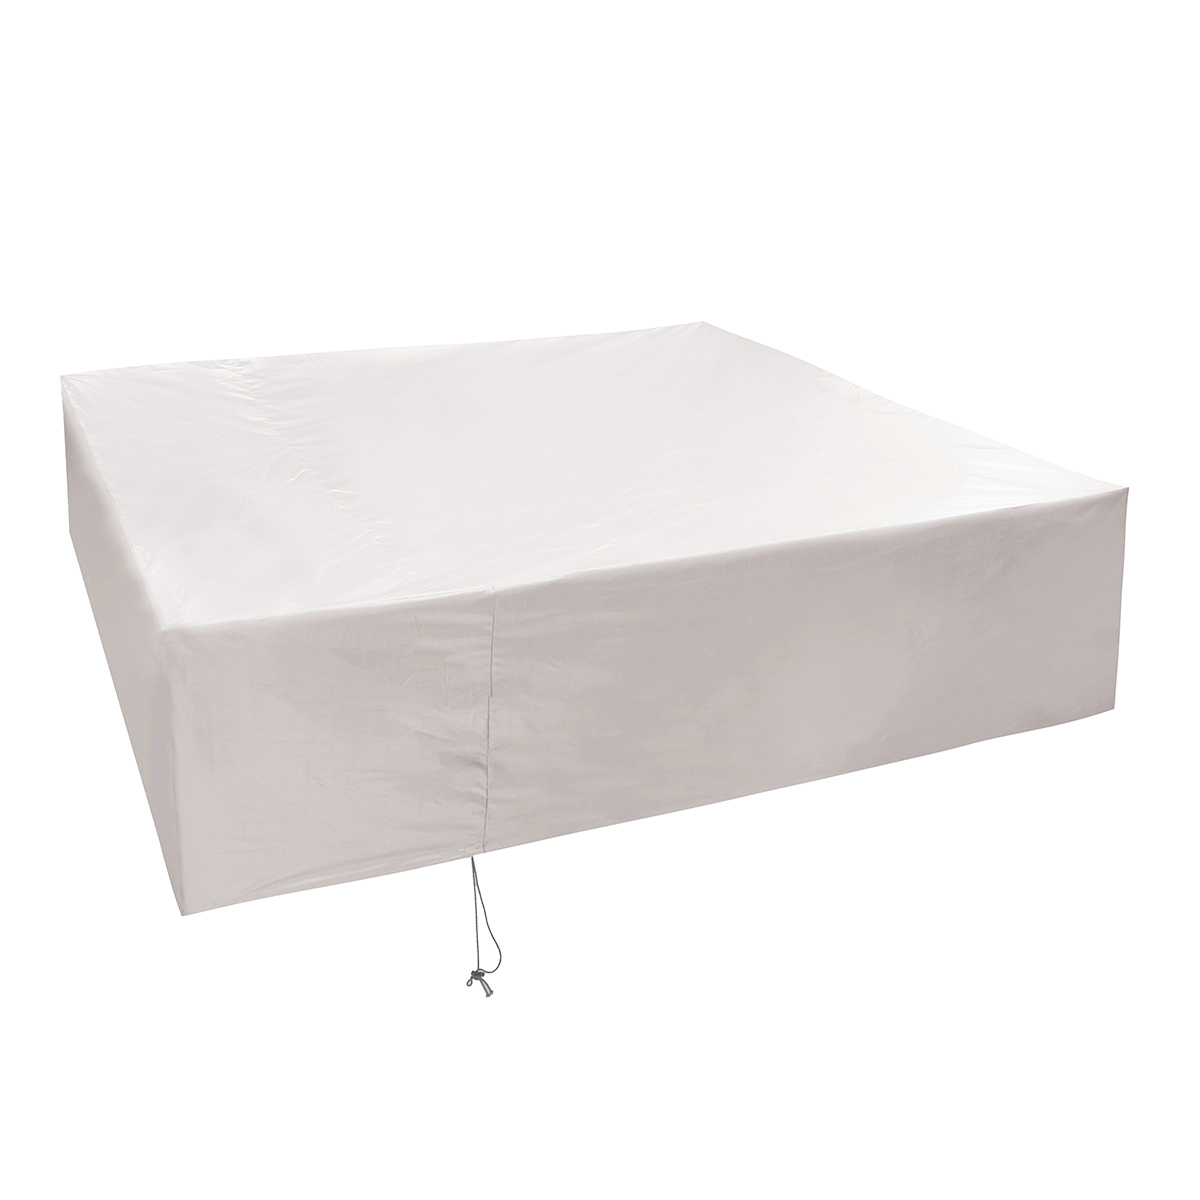 250240220CM-Outdoors-Spa-Hot-Tub-Cover-Waterproof-Furniture-Garden-Protector-1636533-3